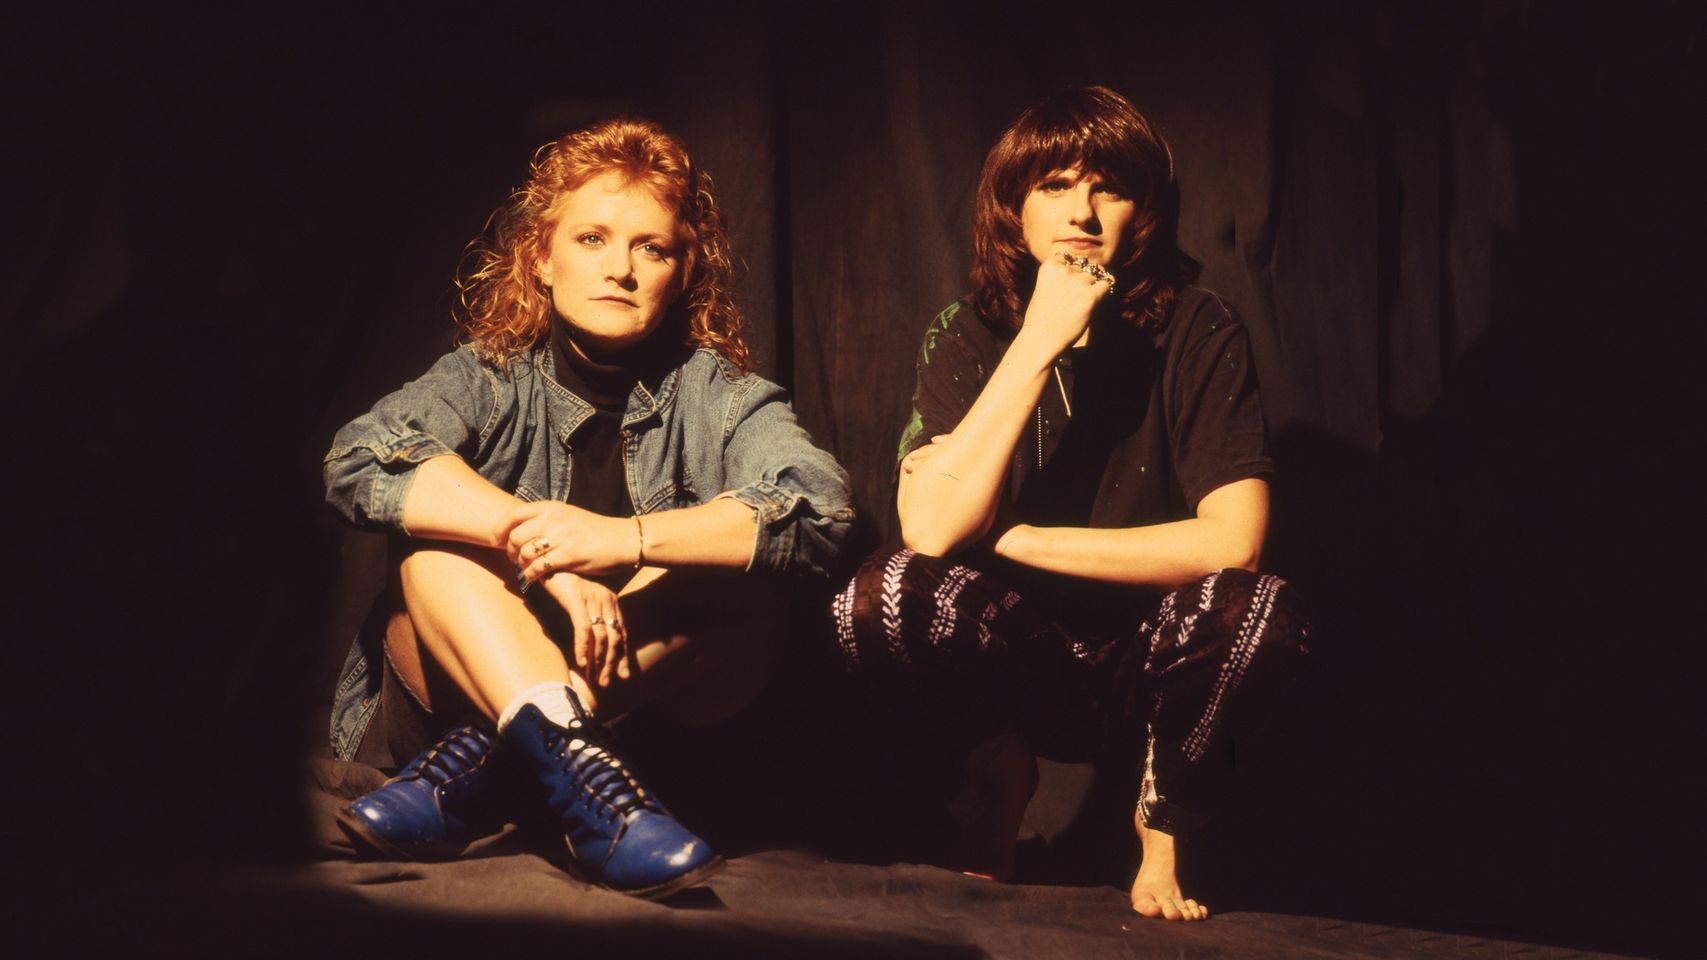 Two women are sitting together in soft lighting. One has curly hair and is dressed casually in a denim jacket and blue shoes. The other woman, sporting straight hair, wears chic black clothing coupled with stylish patterned leggings.